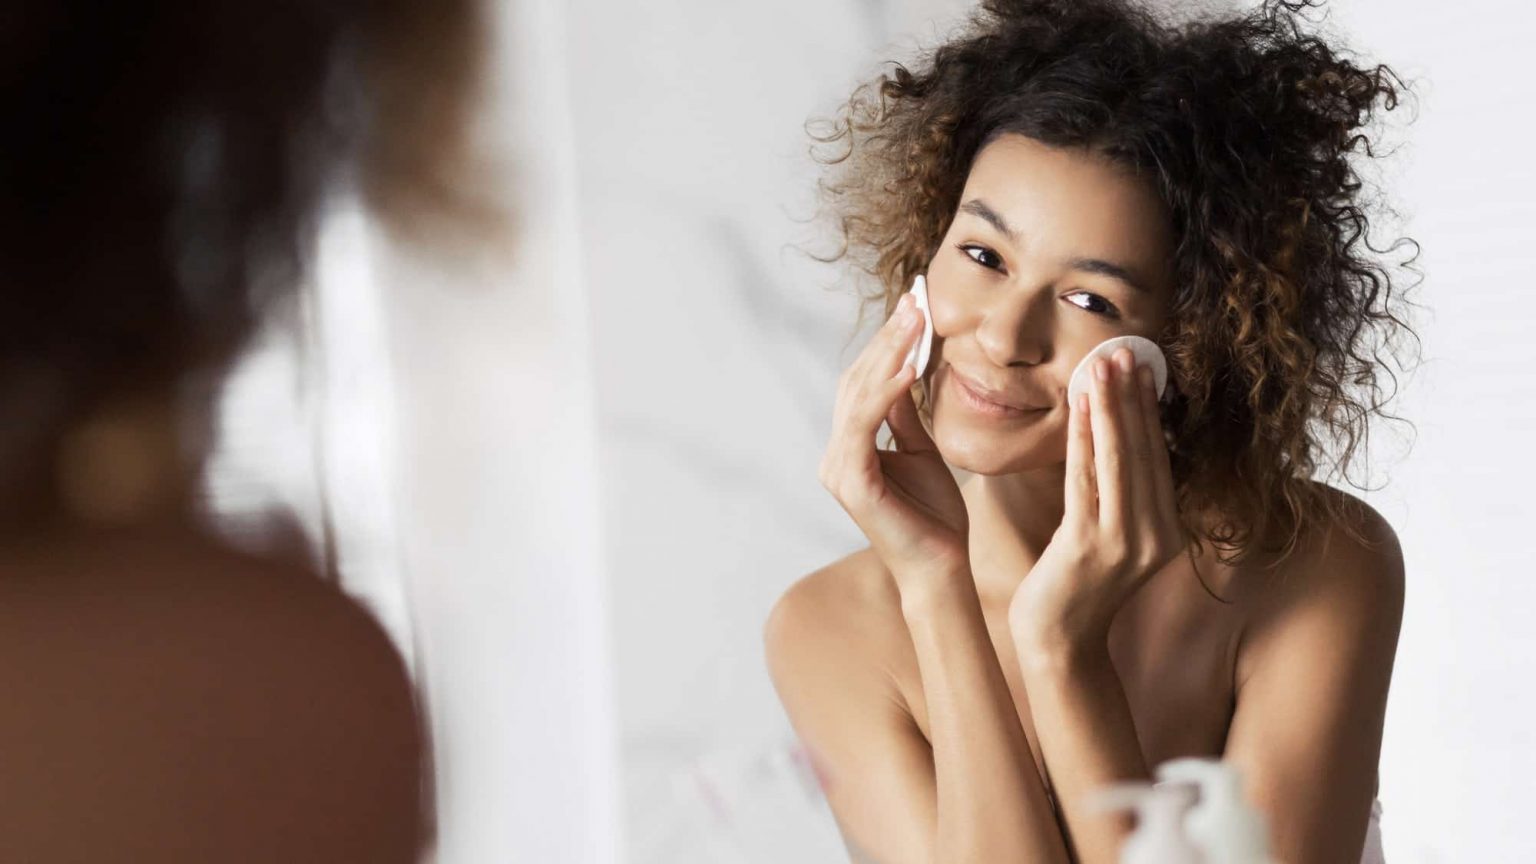 5 Properties Of The Skin You Should Know When You Have Skin Acne